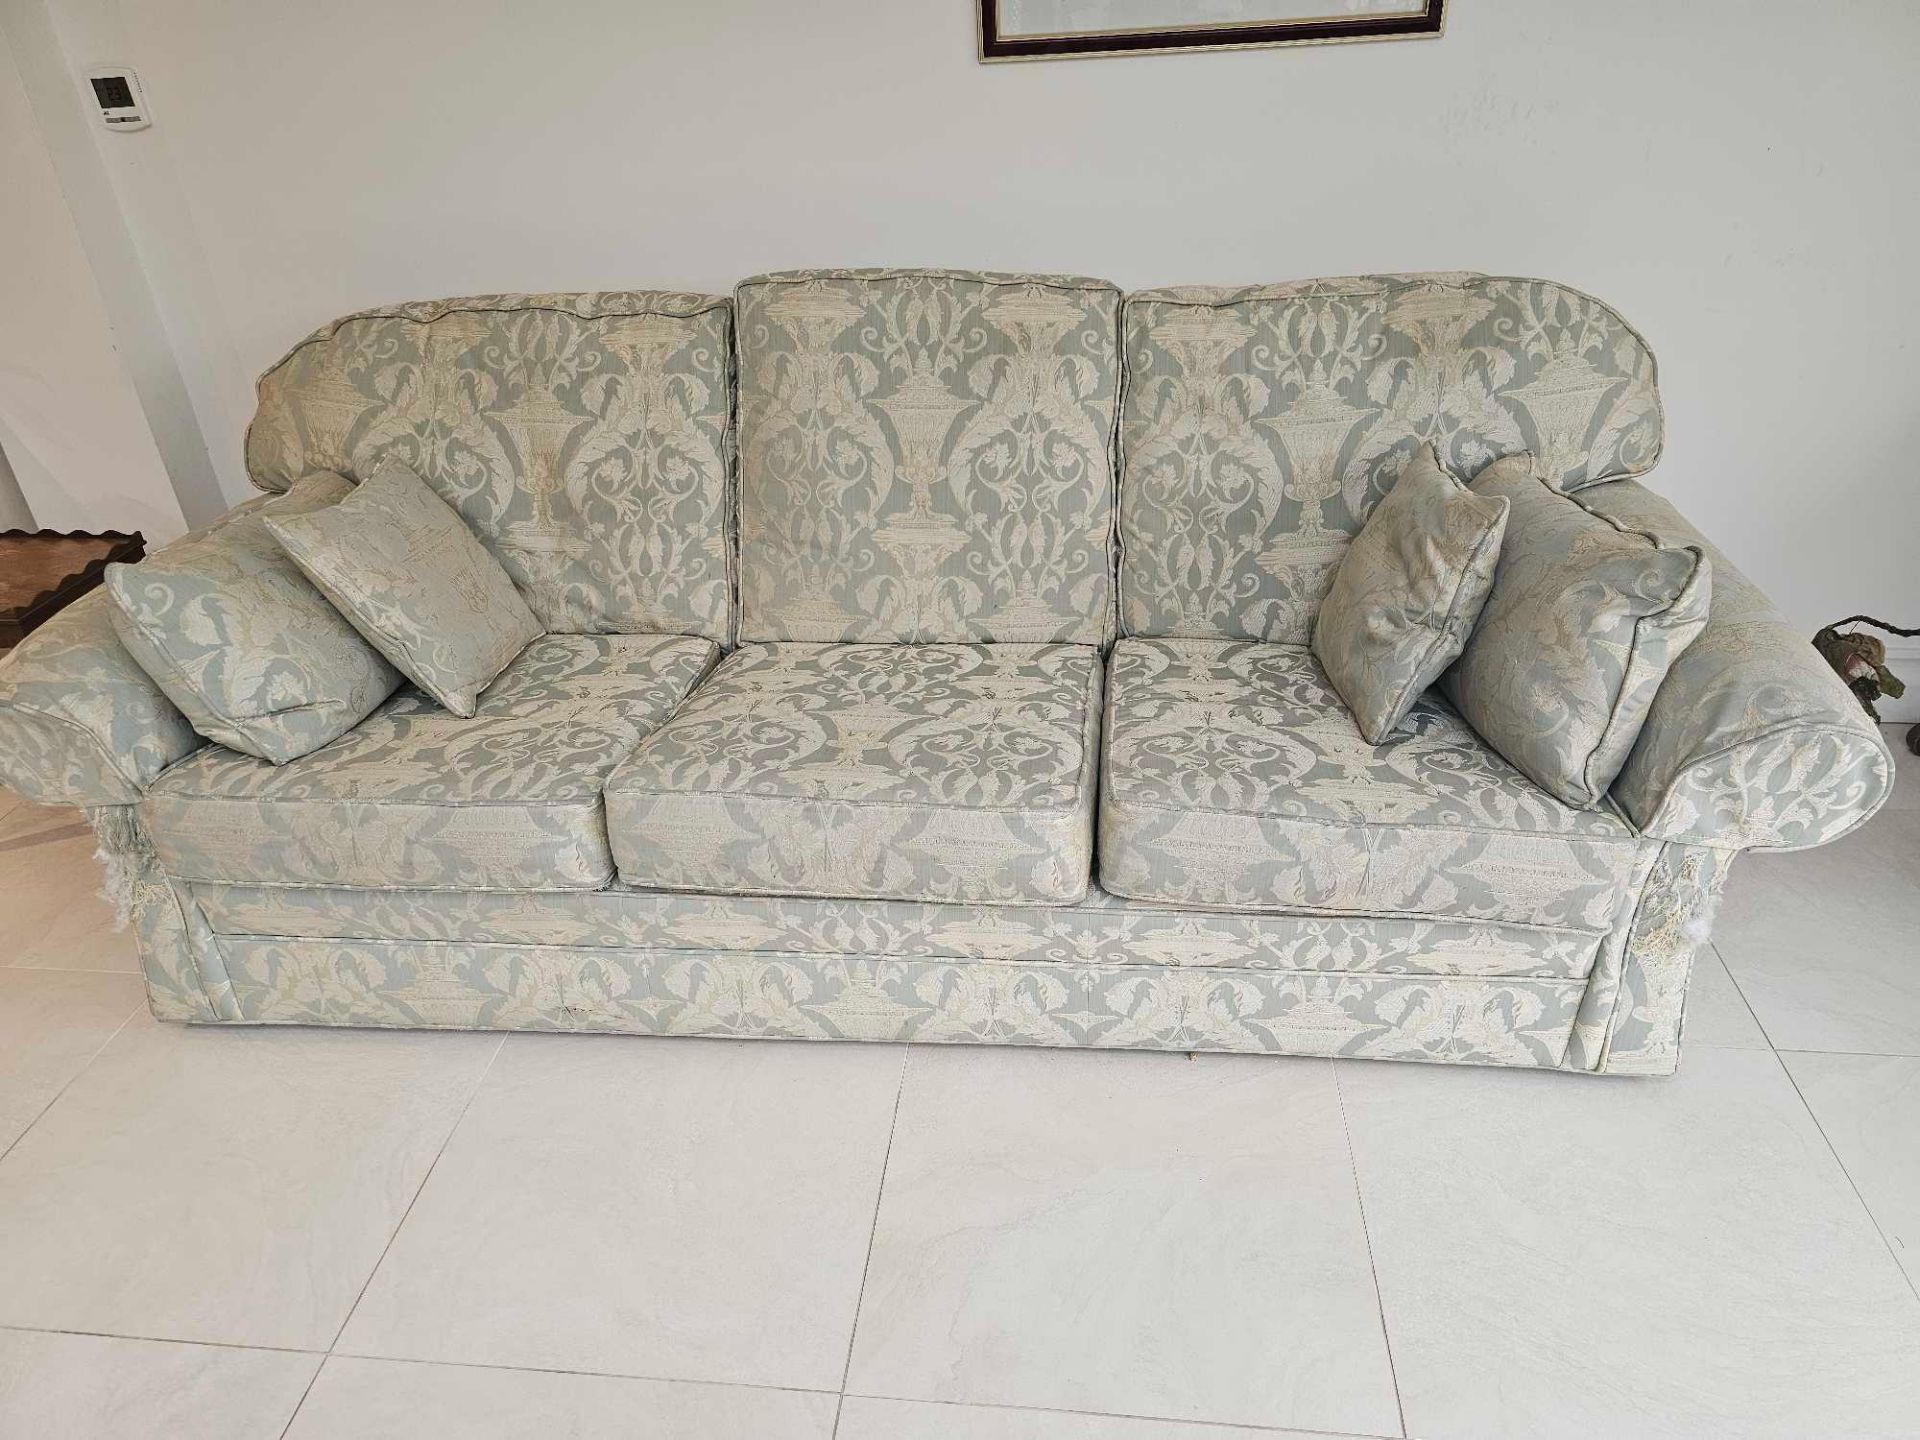 A Peter Guild Upholstered Three Seater Sofa In Damask Embossed Pattern Mint And Gold 235 X 87 X 95cm